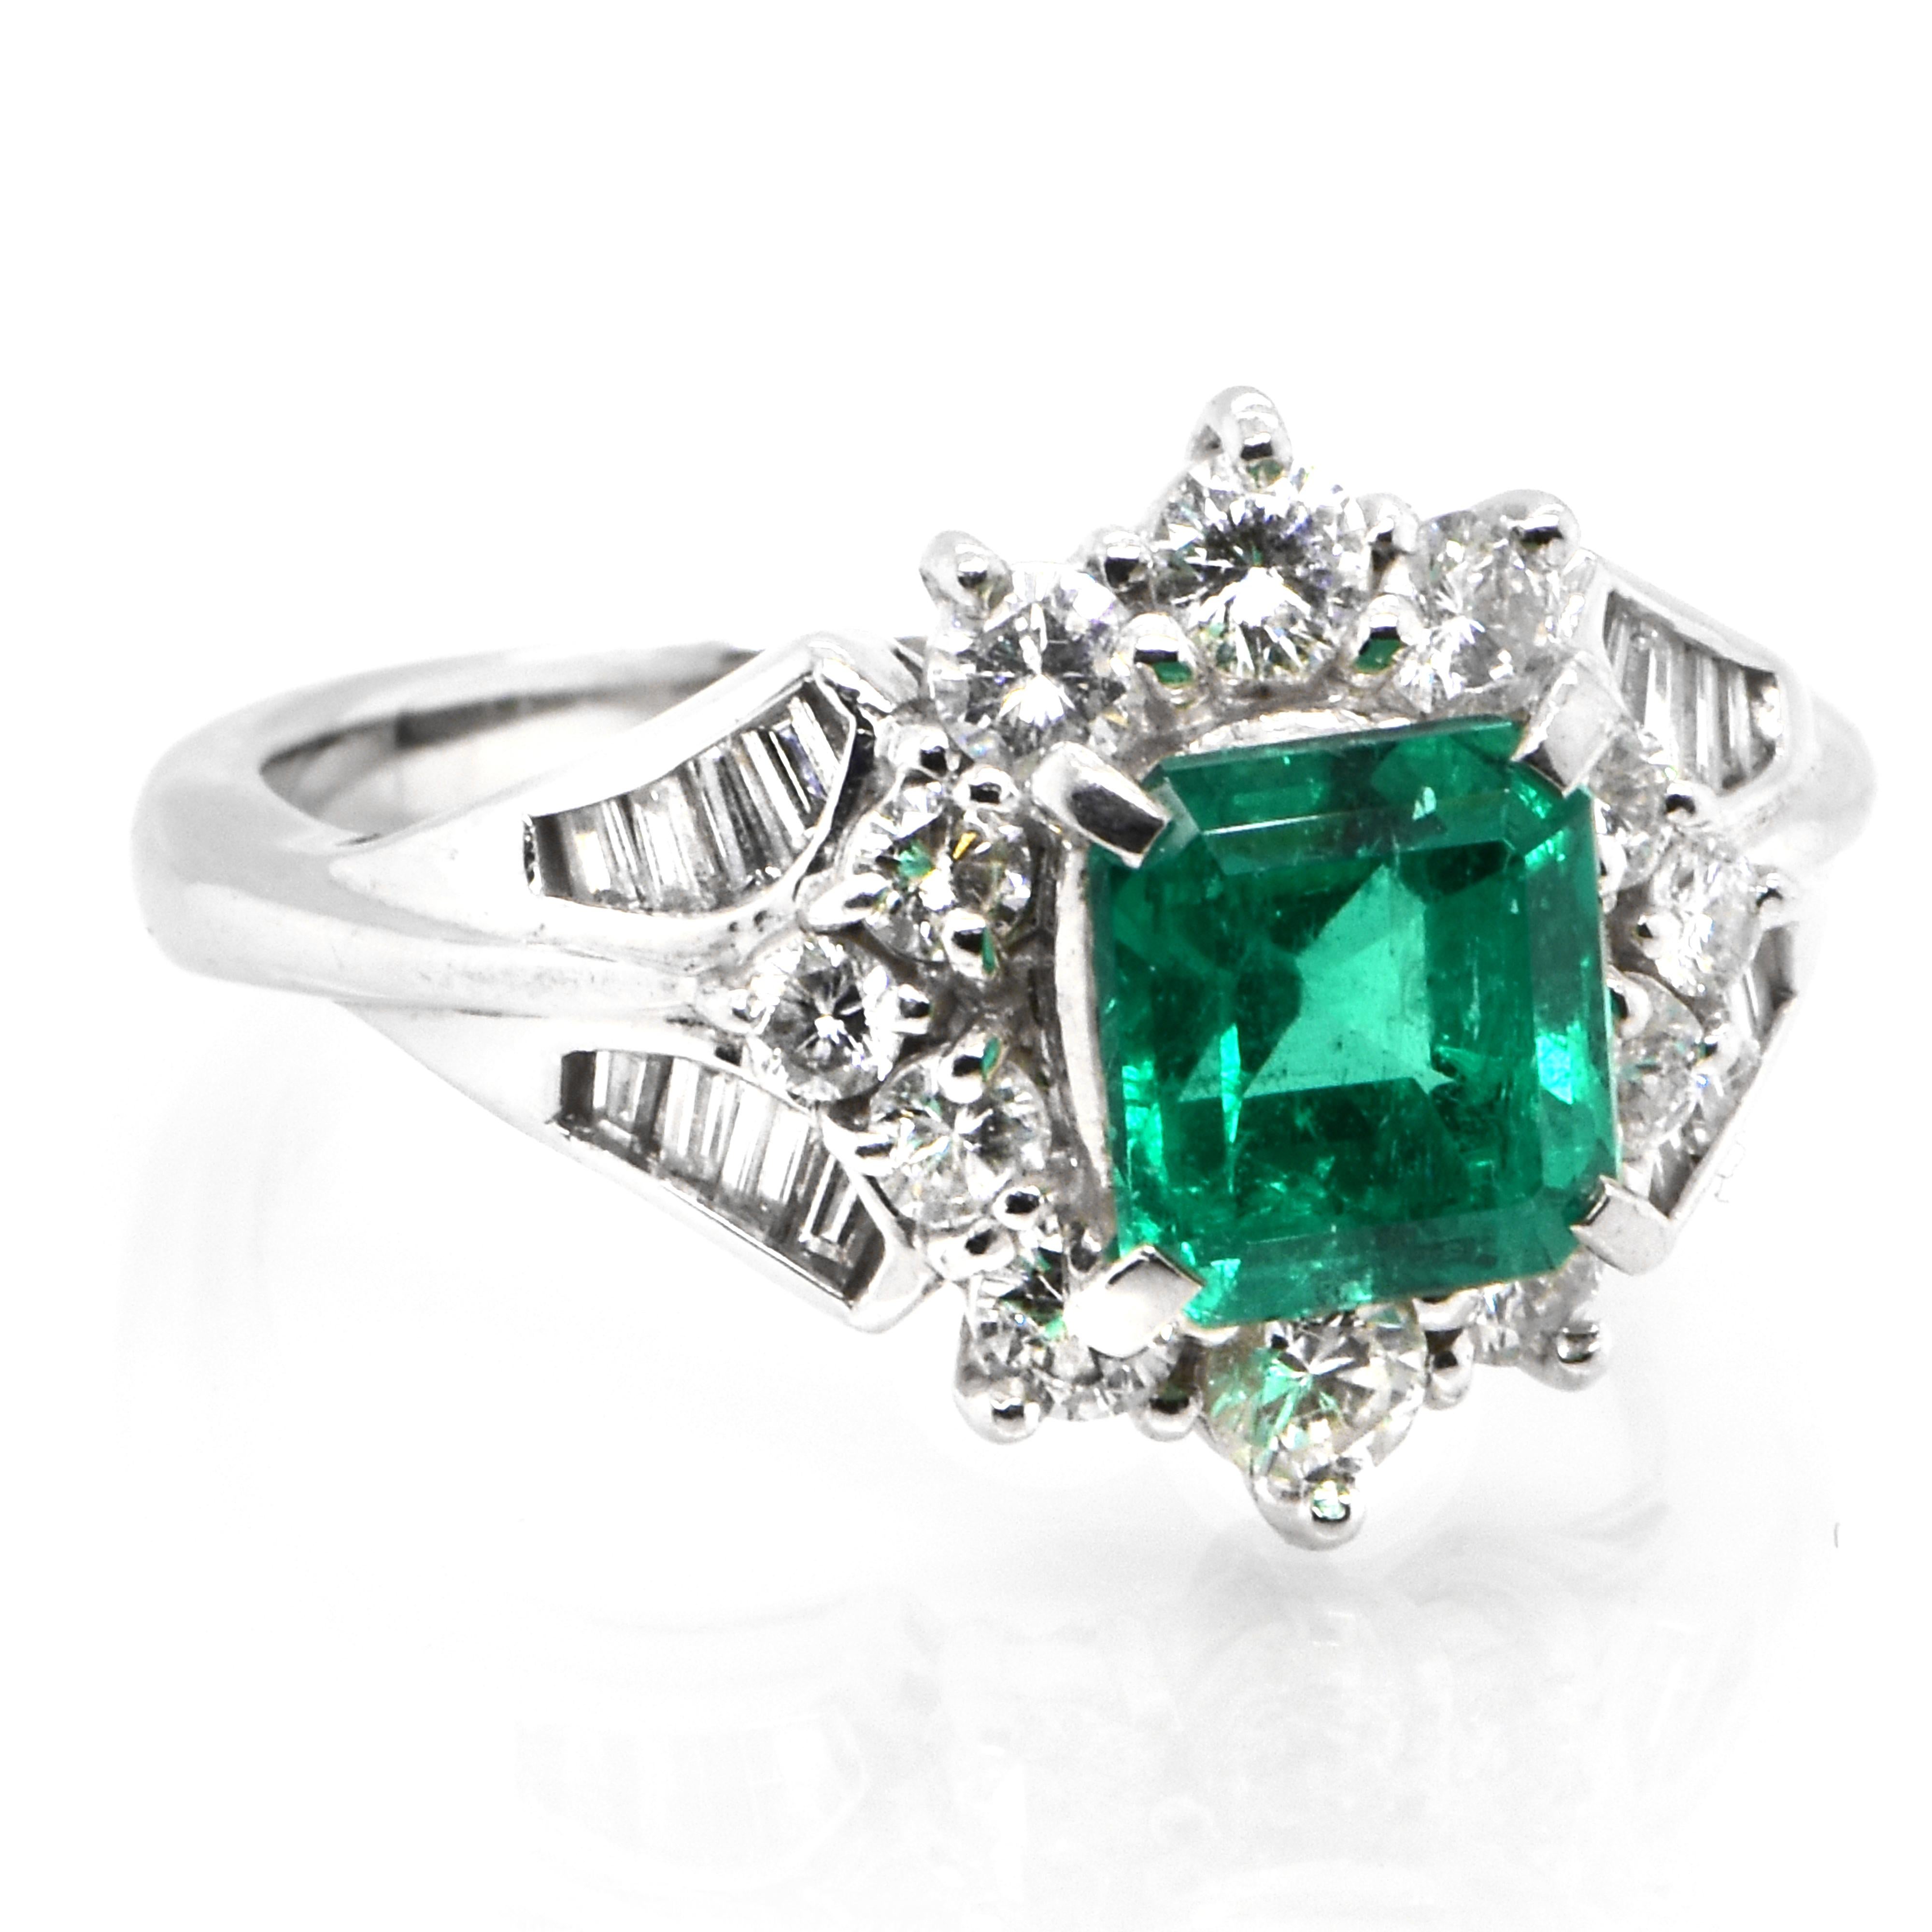 Modern 1.27 Carat Natural Colombian Emerald and Diamond Ring Made in Platinum For Sale